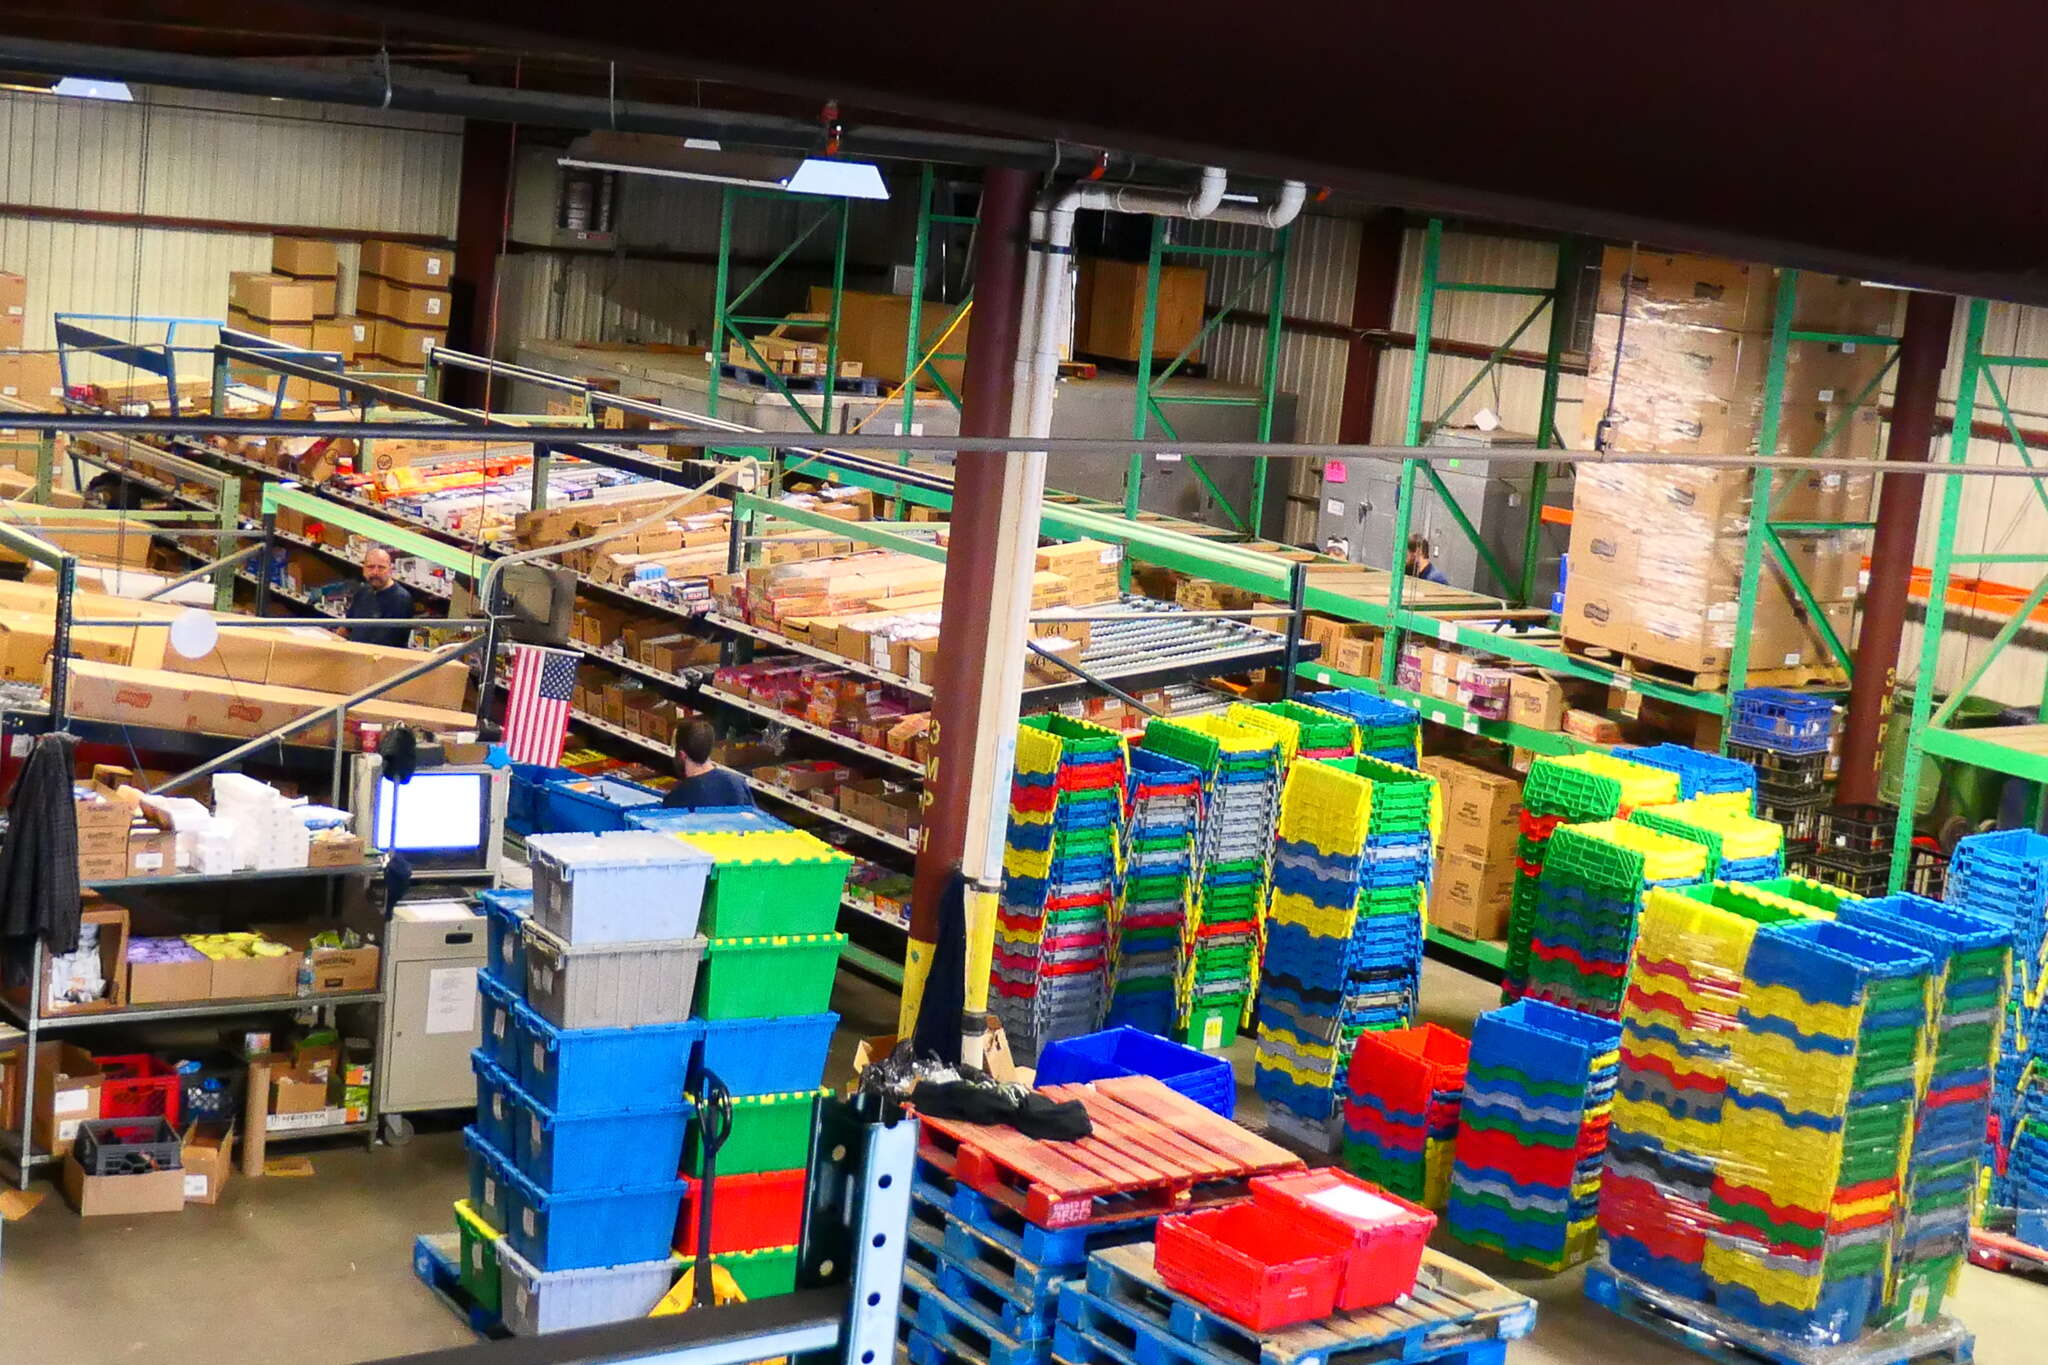 aerial of shelves and crates in big space